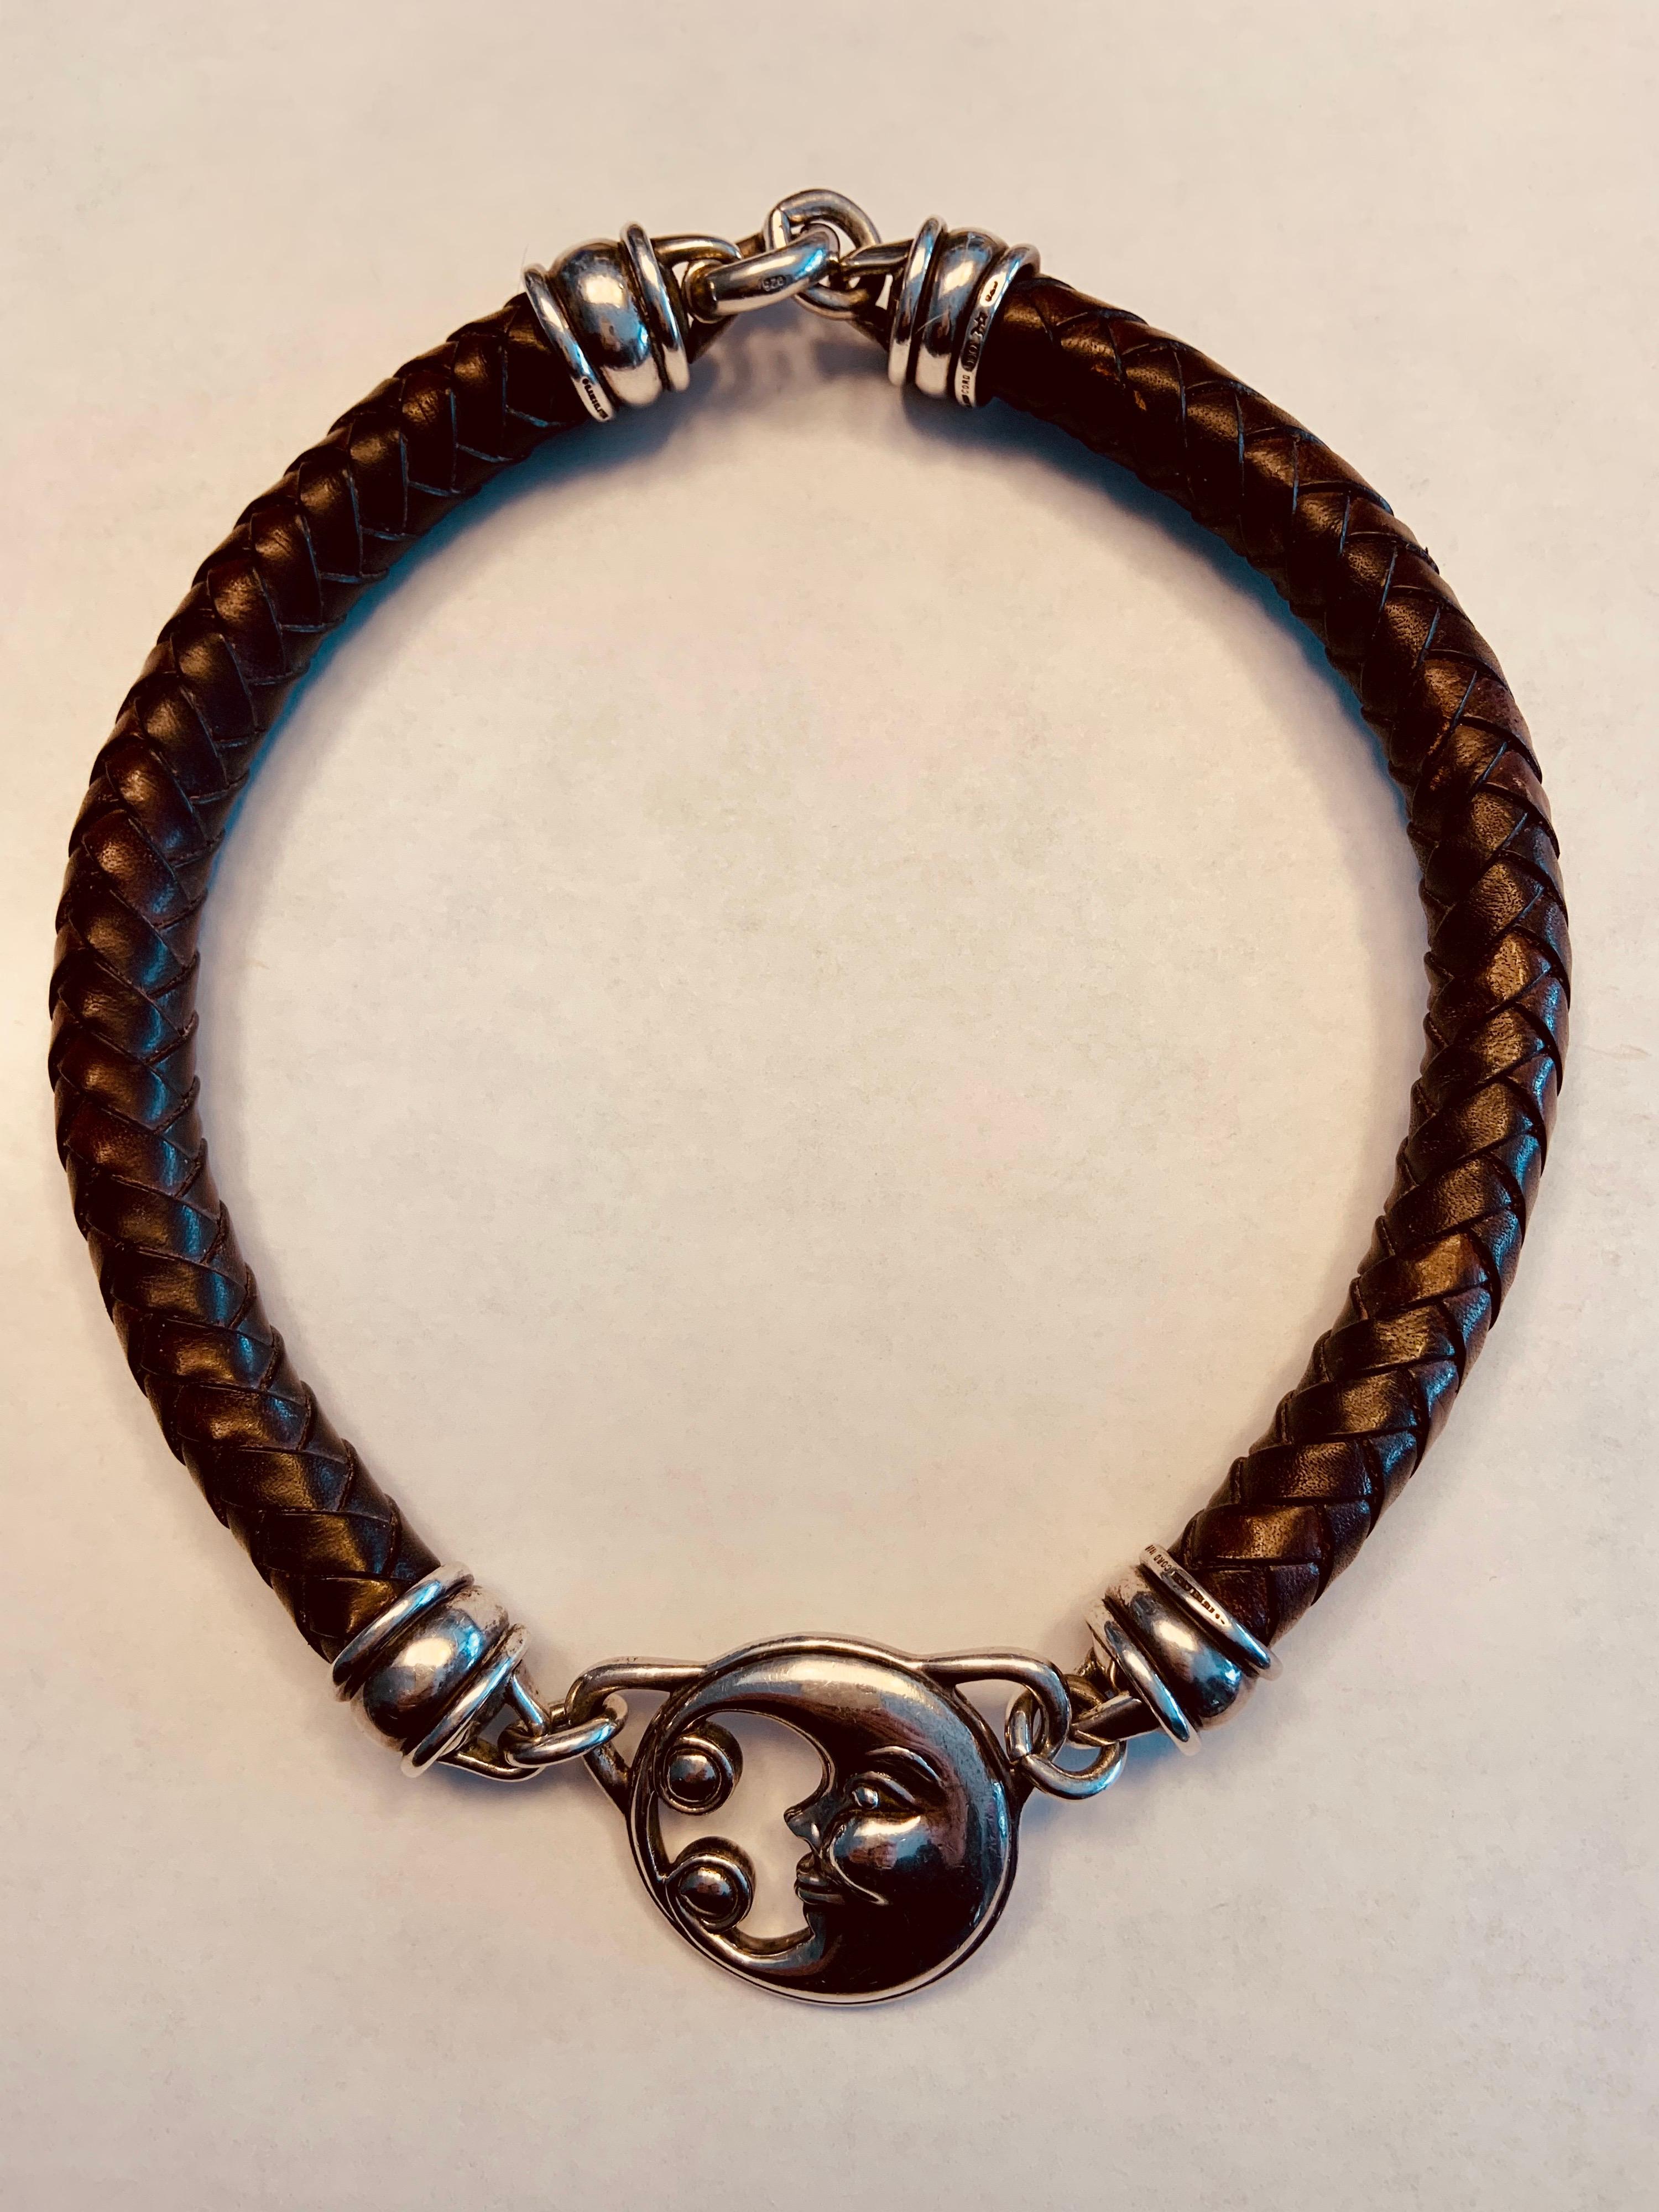 This Barry Kieselstein-Cord sterling silver and chocolate brown braided leather necklace has his iconic Man in the Moon at the center. The double sided Moon is stamped Kieselstein-Cord, 1998 and has the moon and star hallmarks.
Please see the last